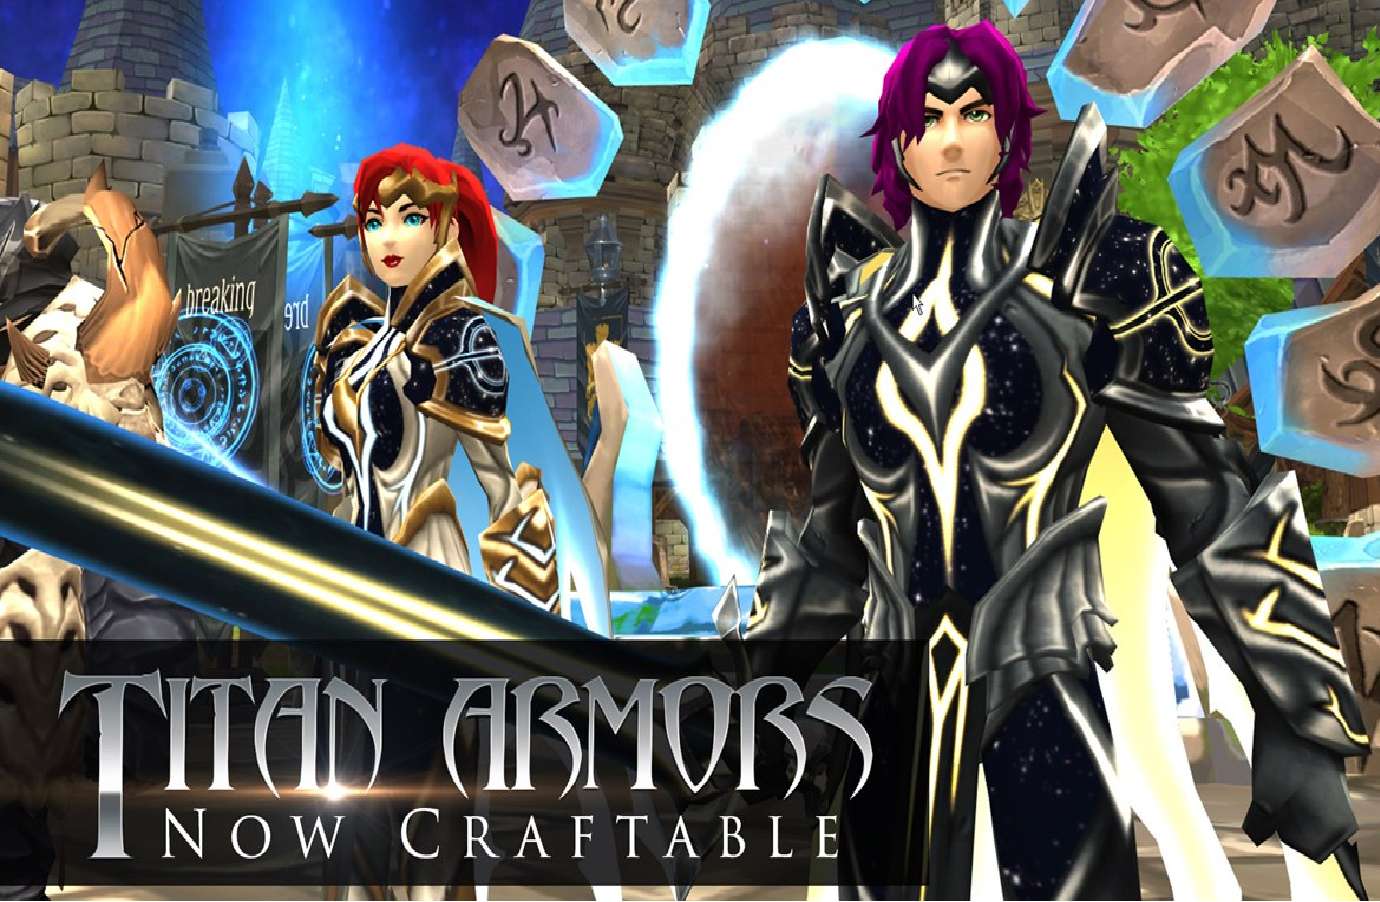 Craftable Items From Breaking Benjamin Battle Concert Now Available For Players To Create In AdventureQuest 3D